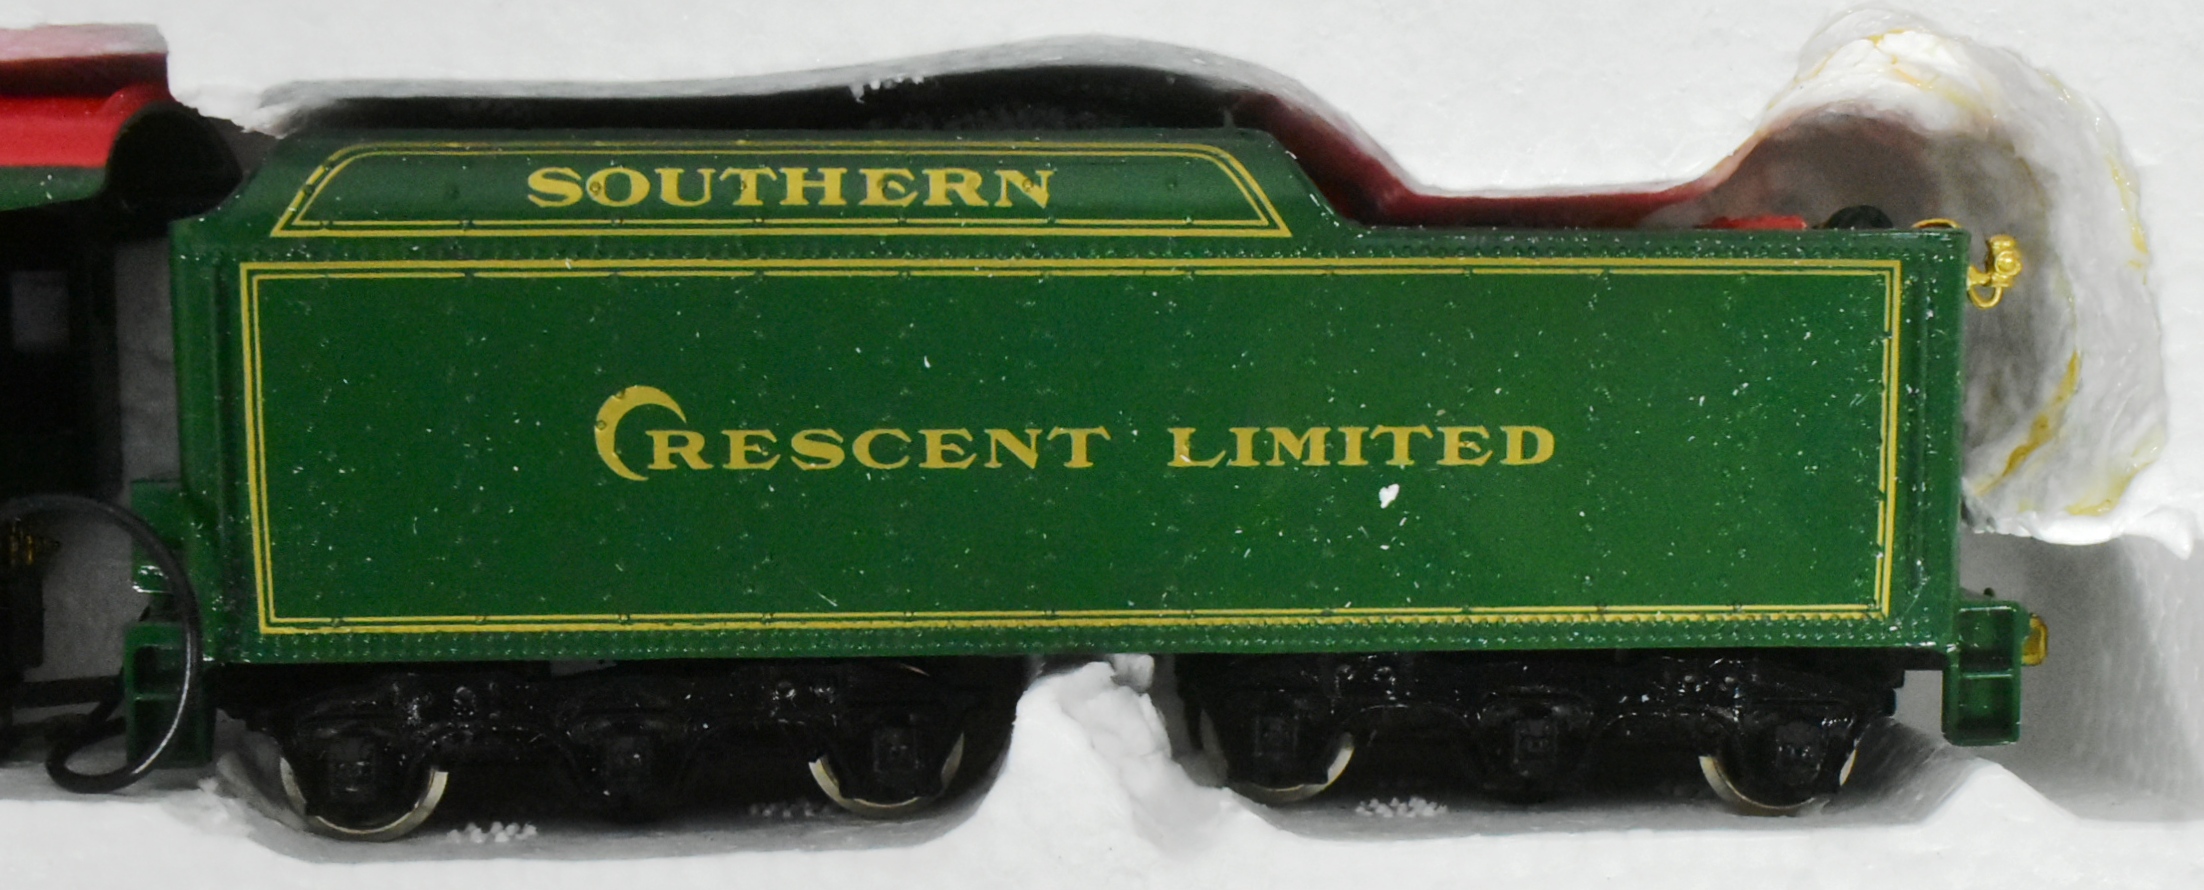 MATCHBOX COLLECTIBLES - CRESCENT LIMITED - H0 SCALE MODEL TRAIN - Image 3 of 4